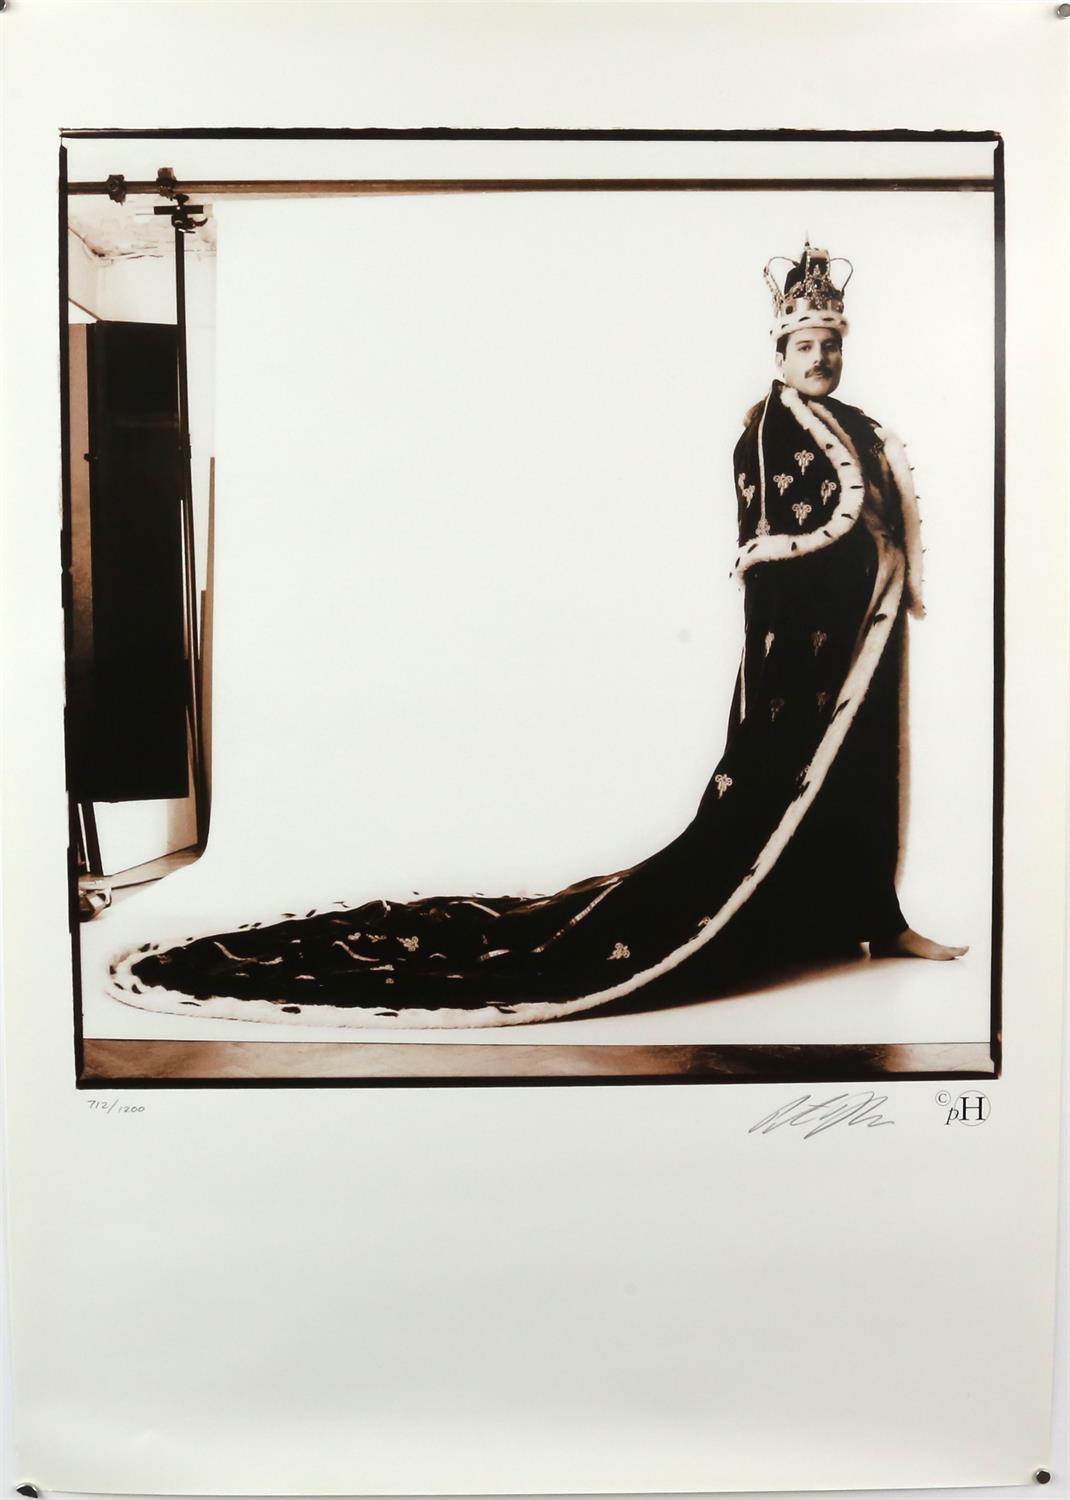 Queen - A2 Limited edition signed print of Freddie Mercury in his royal robes by photographer Peter - Image 4 of 6